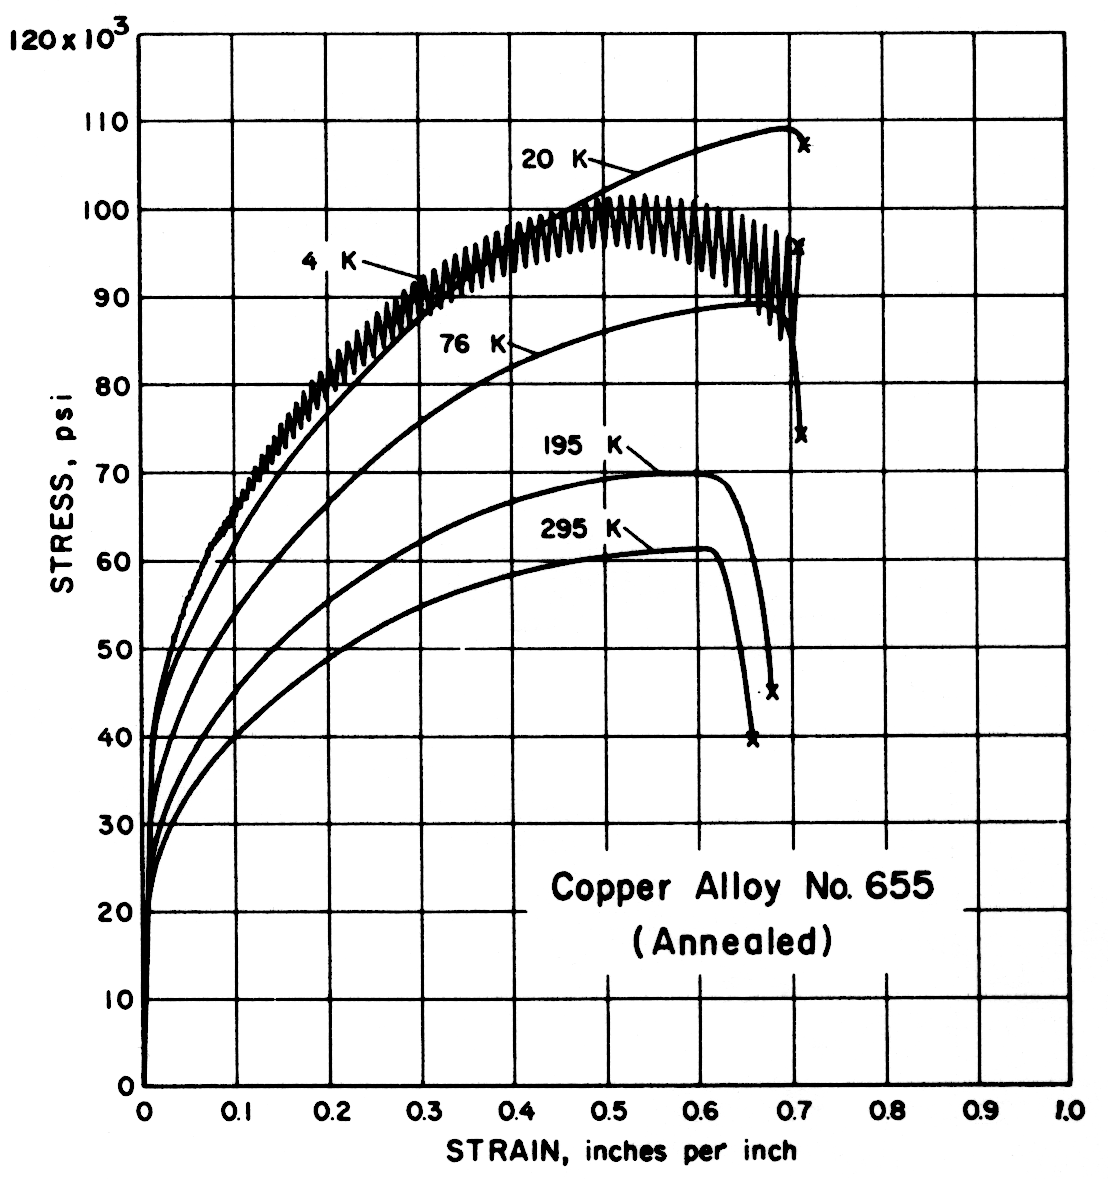 Copper Alloy No. 655 (Annealed)